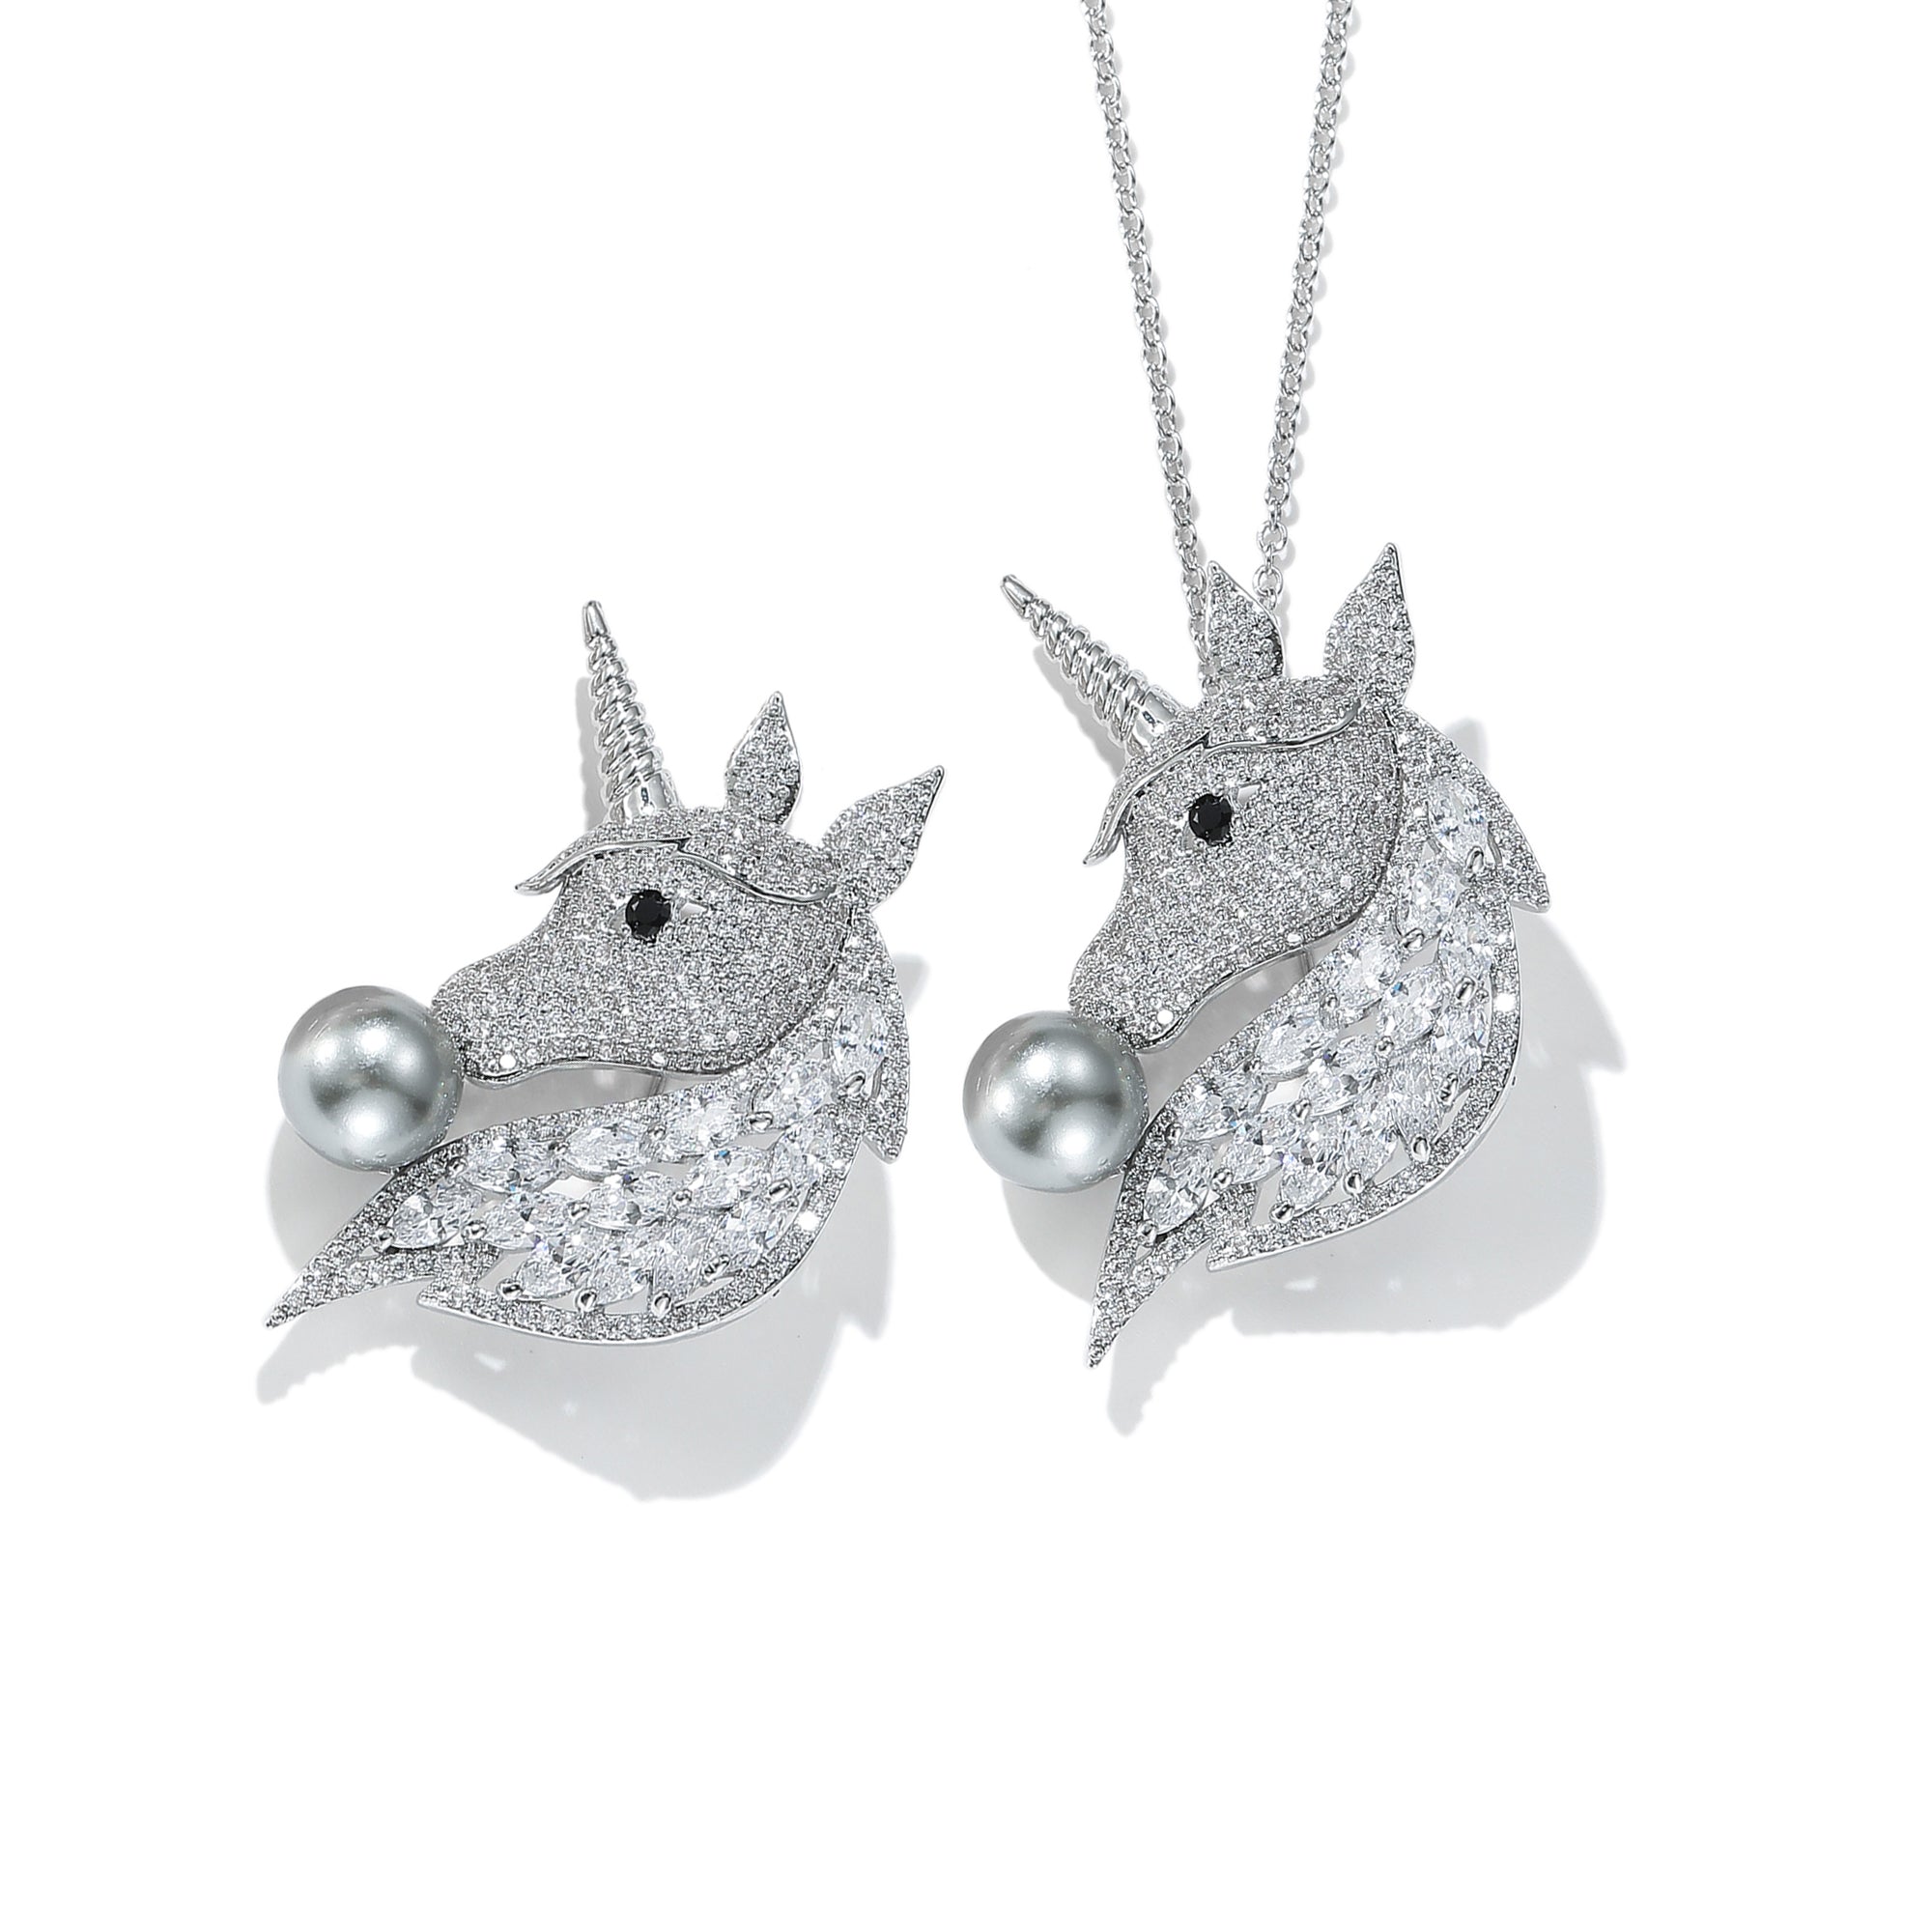 Classicharms Silver Pavé Unicorn Brooch and Necklace Set